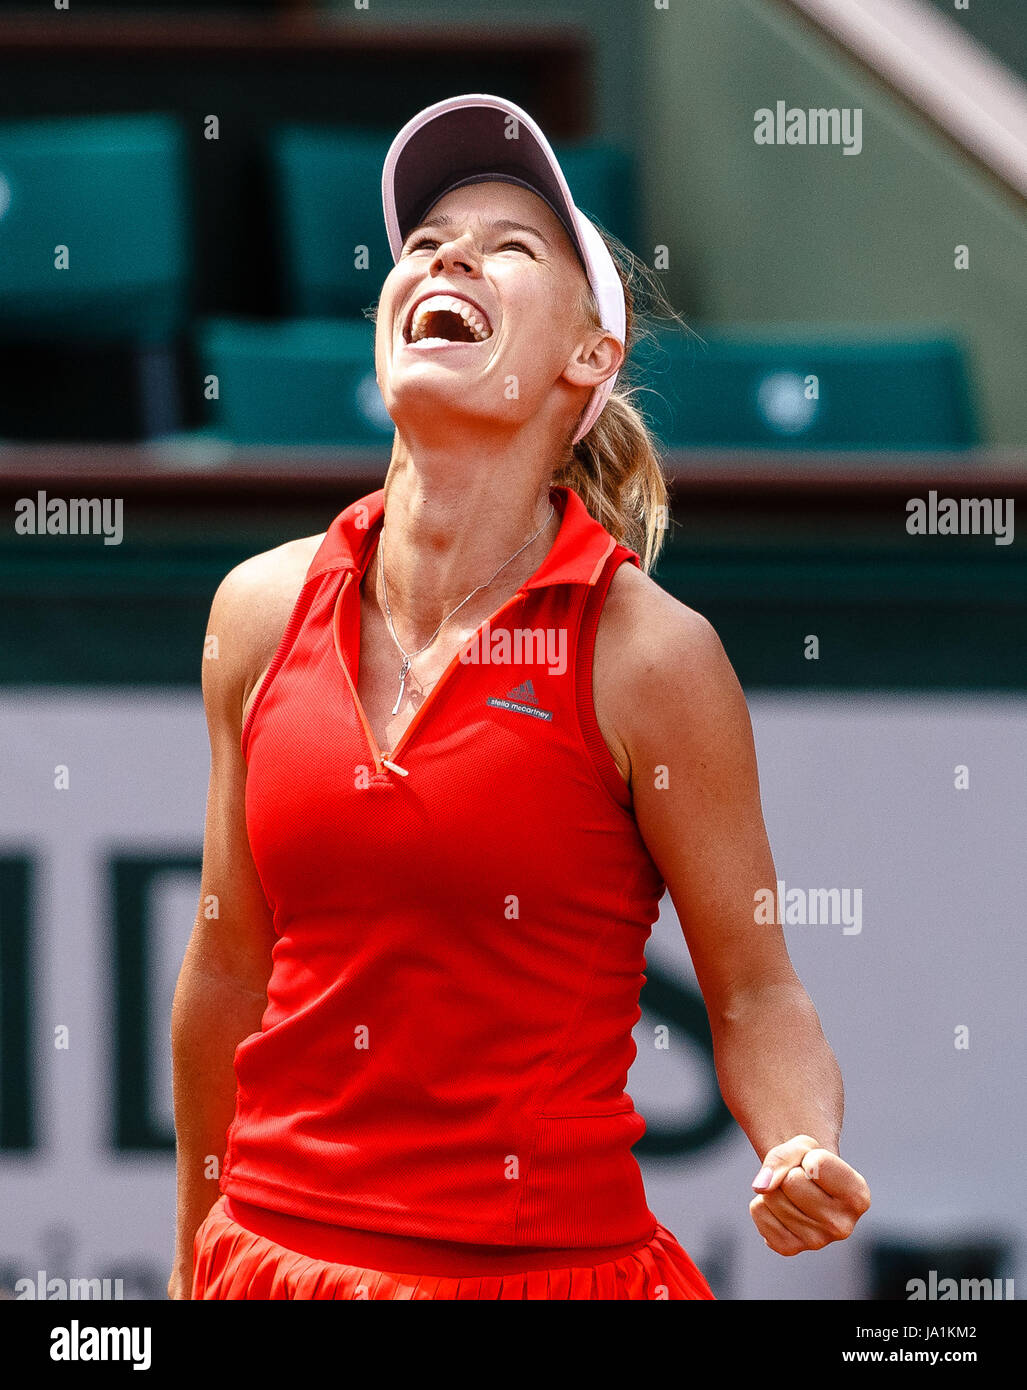 Red Tennis Dress High Resolution Stock Photography and Images - Alamy